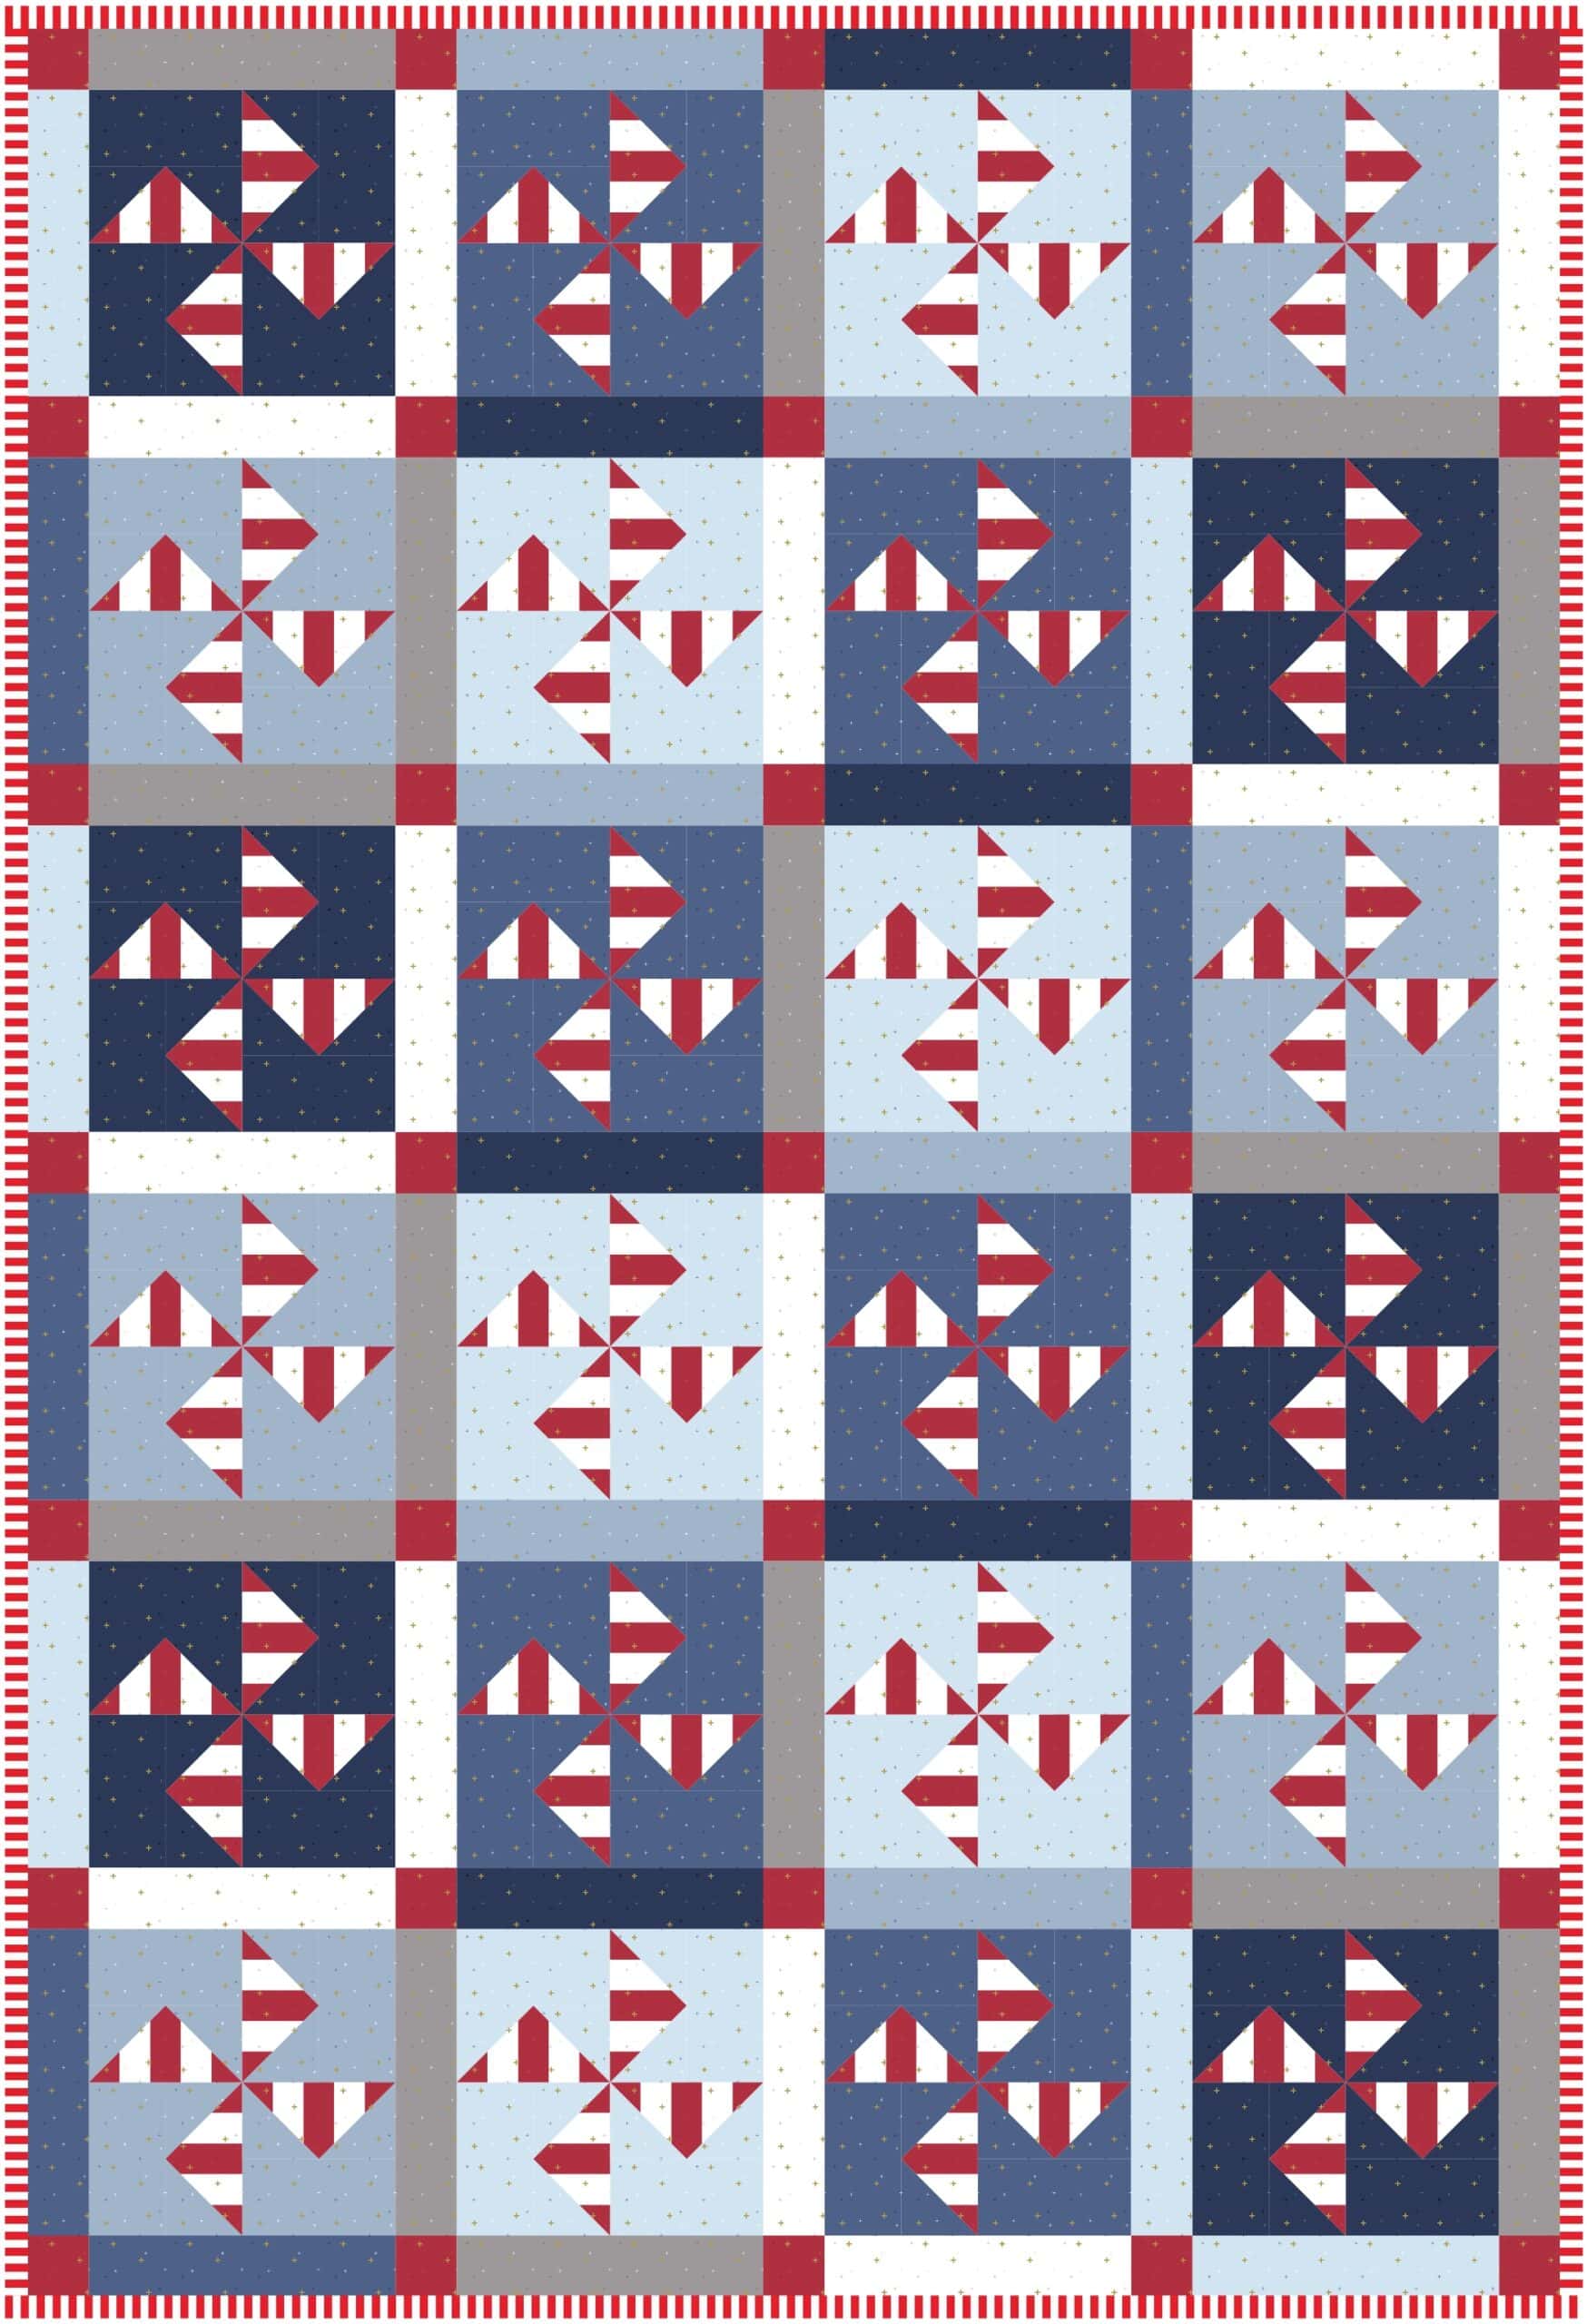 red white and blue quilt illustration